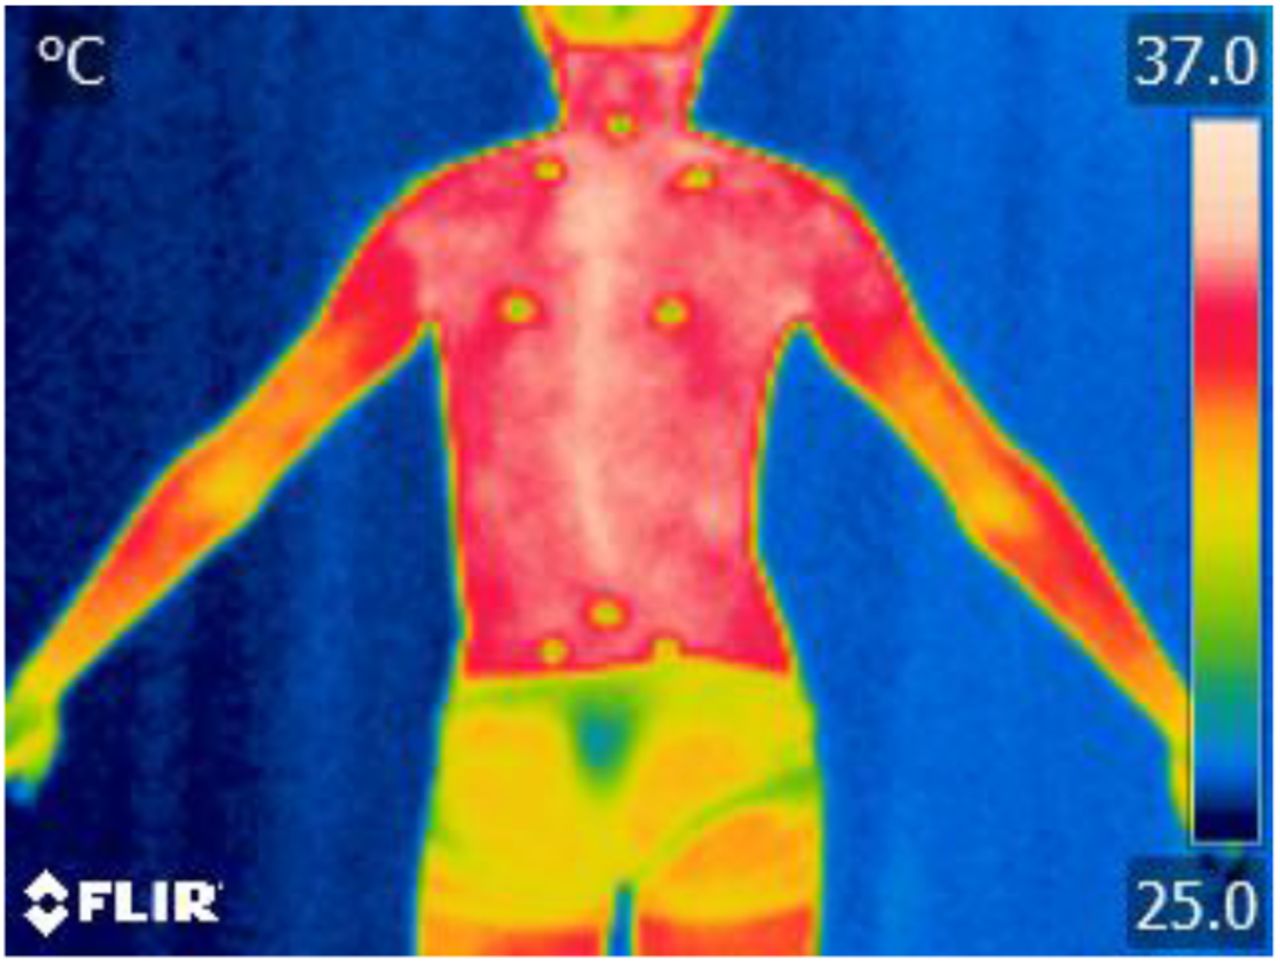 Can infrared camera images be used for screening in Adolescent Idiopathic Scoliosis? medRxiv